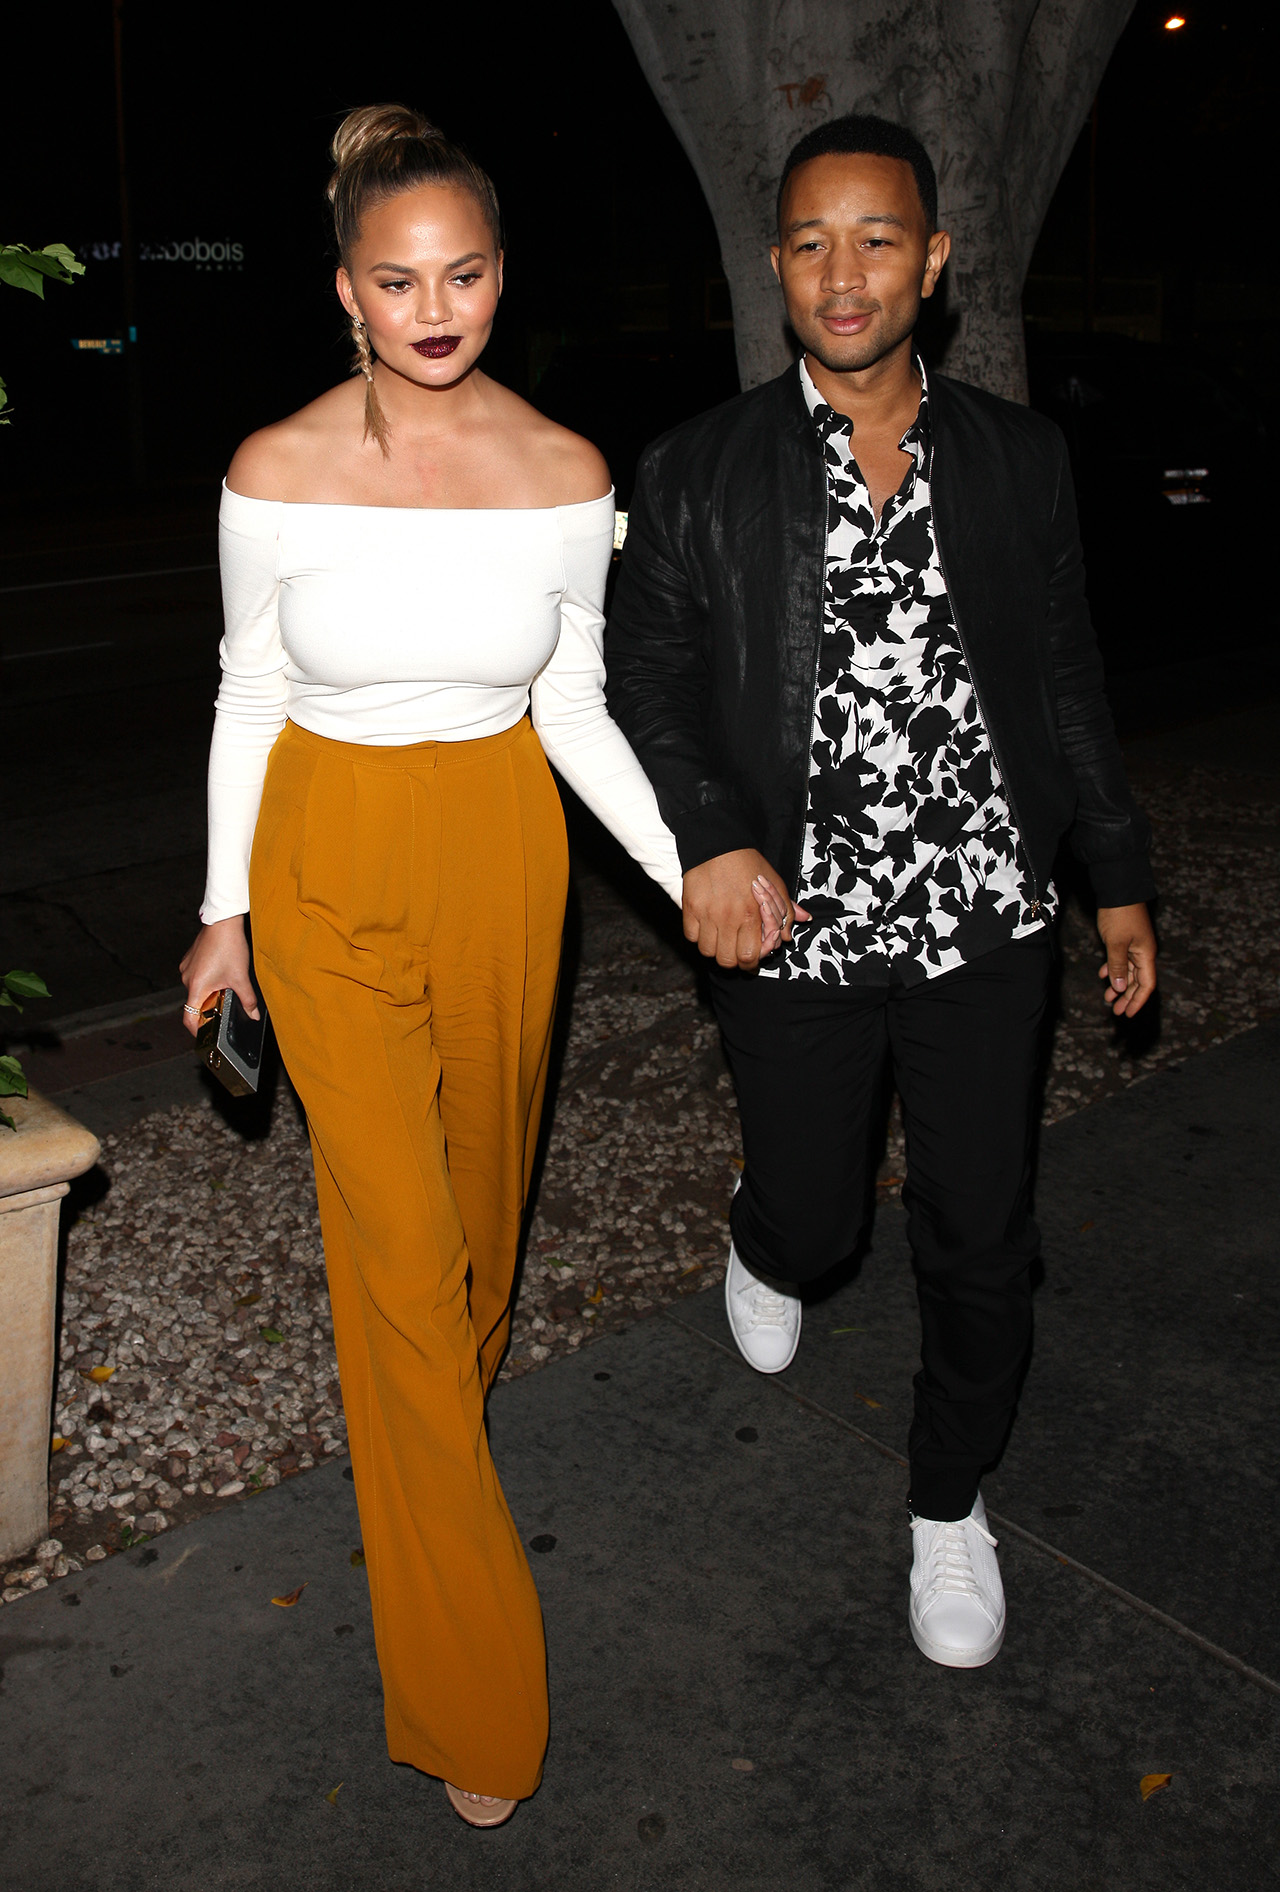 EXCLUSIVE: Chrissy Teigen and John Legend dine at Madeo Restaurant for a romantic dinner in West Hollywood. Pictured: Chrissy Teigen And John Legend Ref: SPL1338986 220816 EXCLUSIVE Picture by: Photographer Group / Splash News Splash News and Pictures Los Angeles:310-821-2666 New York:212-619-2666 London:870-934-2666 photodesk@splashnews.com 